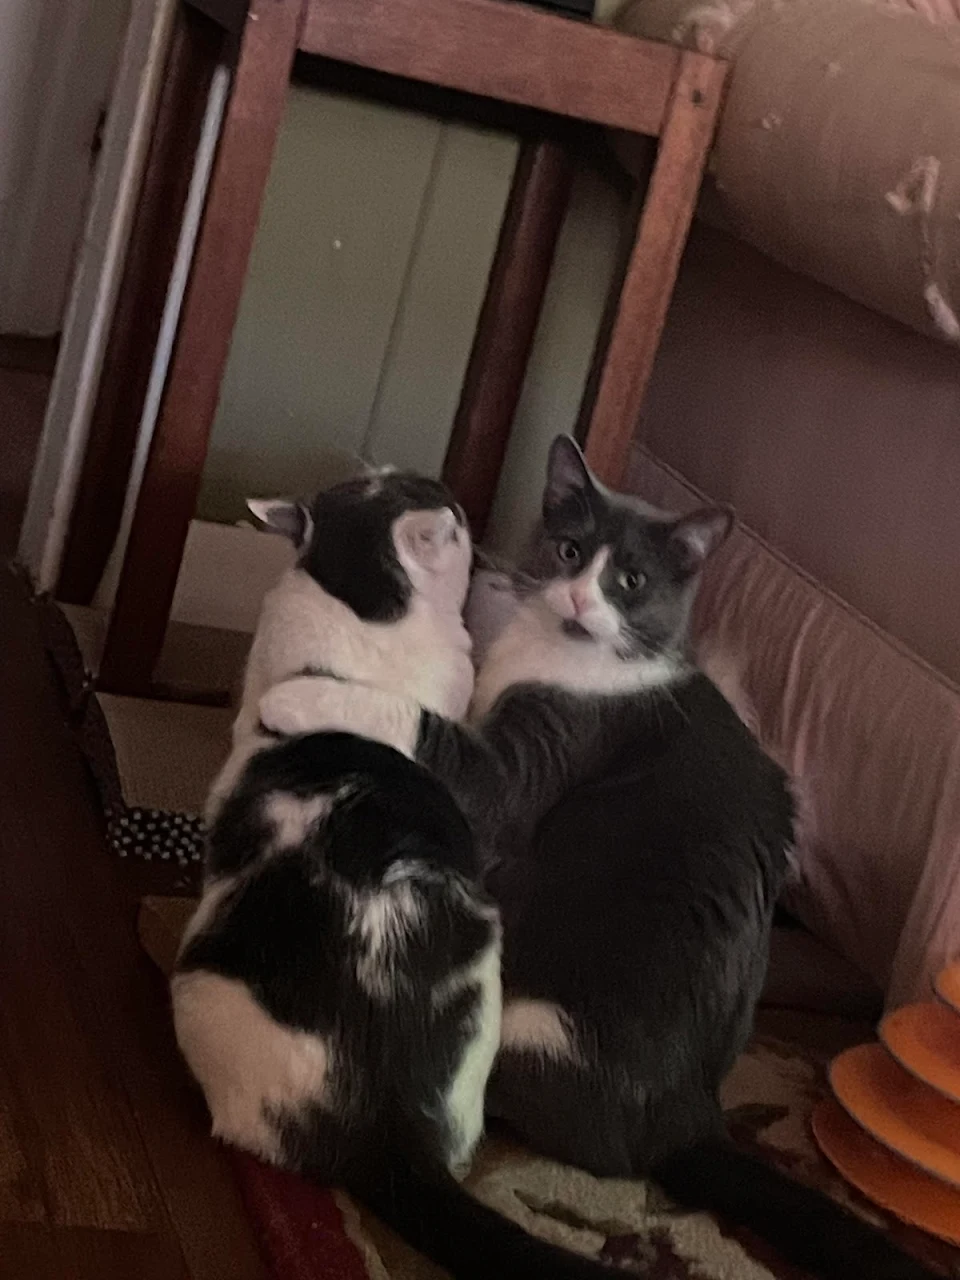 Can’t believe I got this pic these are my 2 kitty sister cats they are good buds clearly